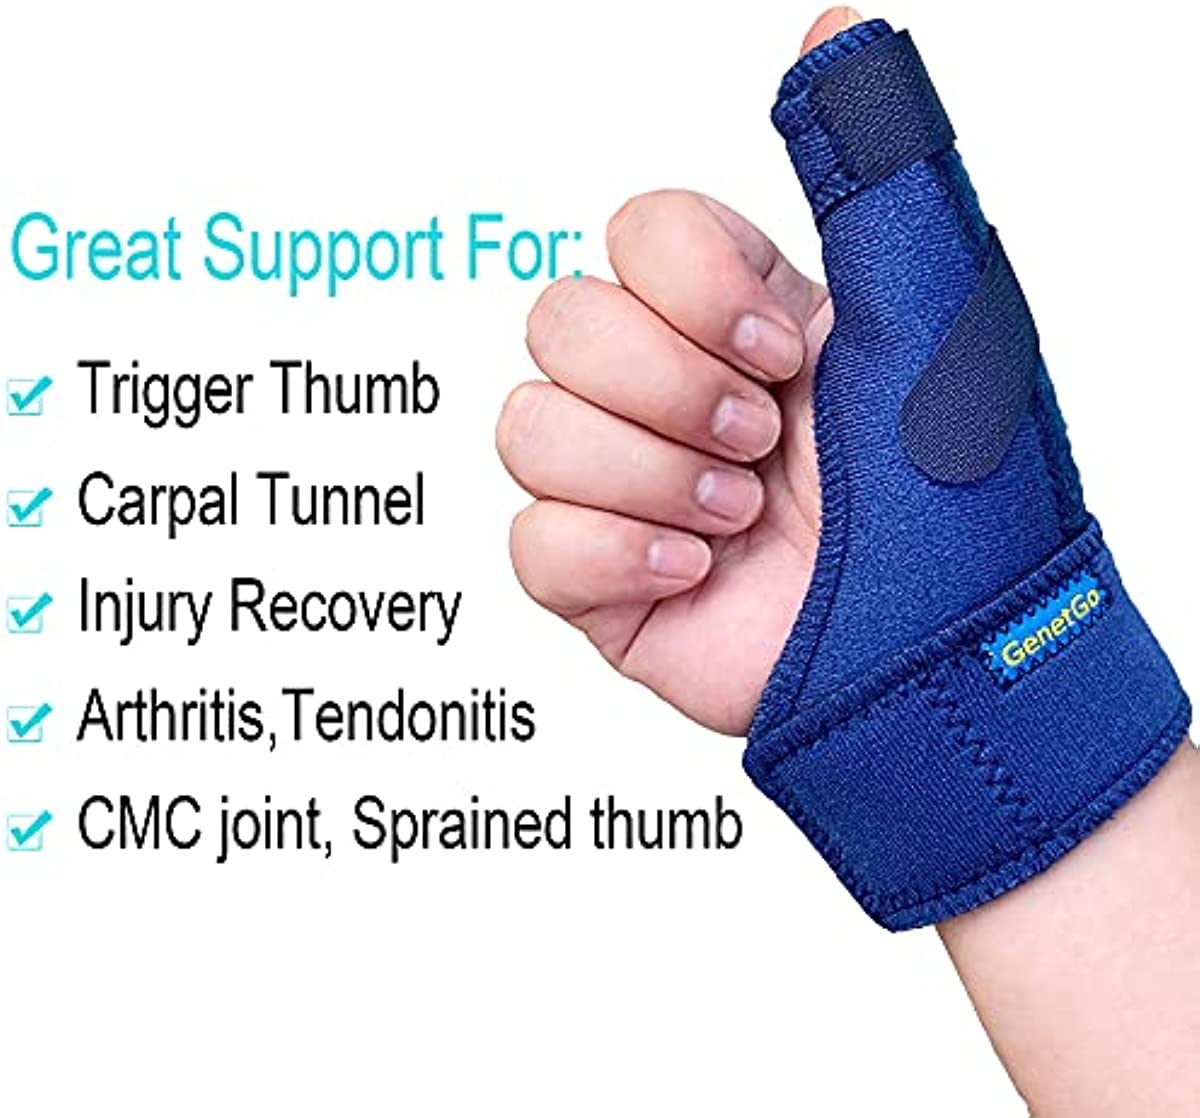 GenetGo Trigger Thumb Splints - Thumb Spica Support Brace Stabilizer for Carpal Tunnel, Arthritis, Sprains, Strains, Pain Relief - Left or Right Hand